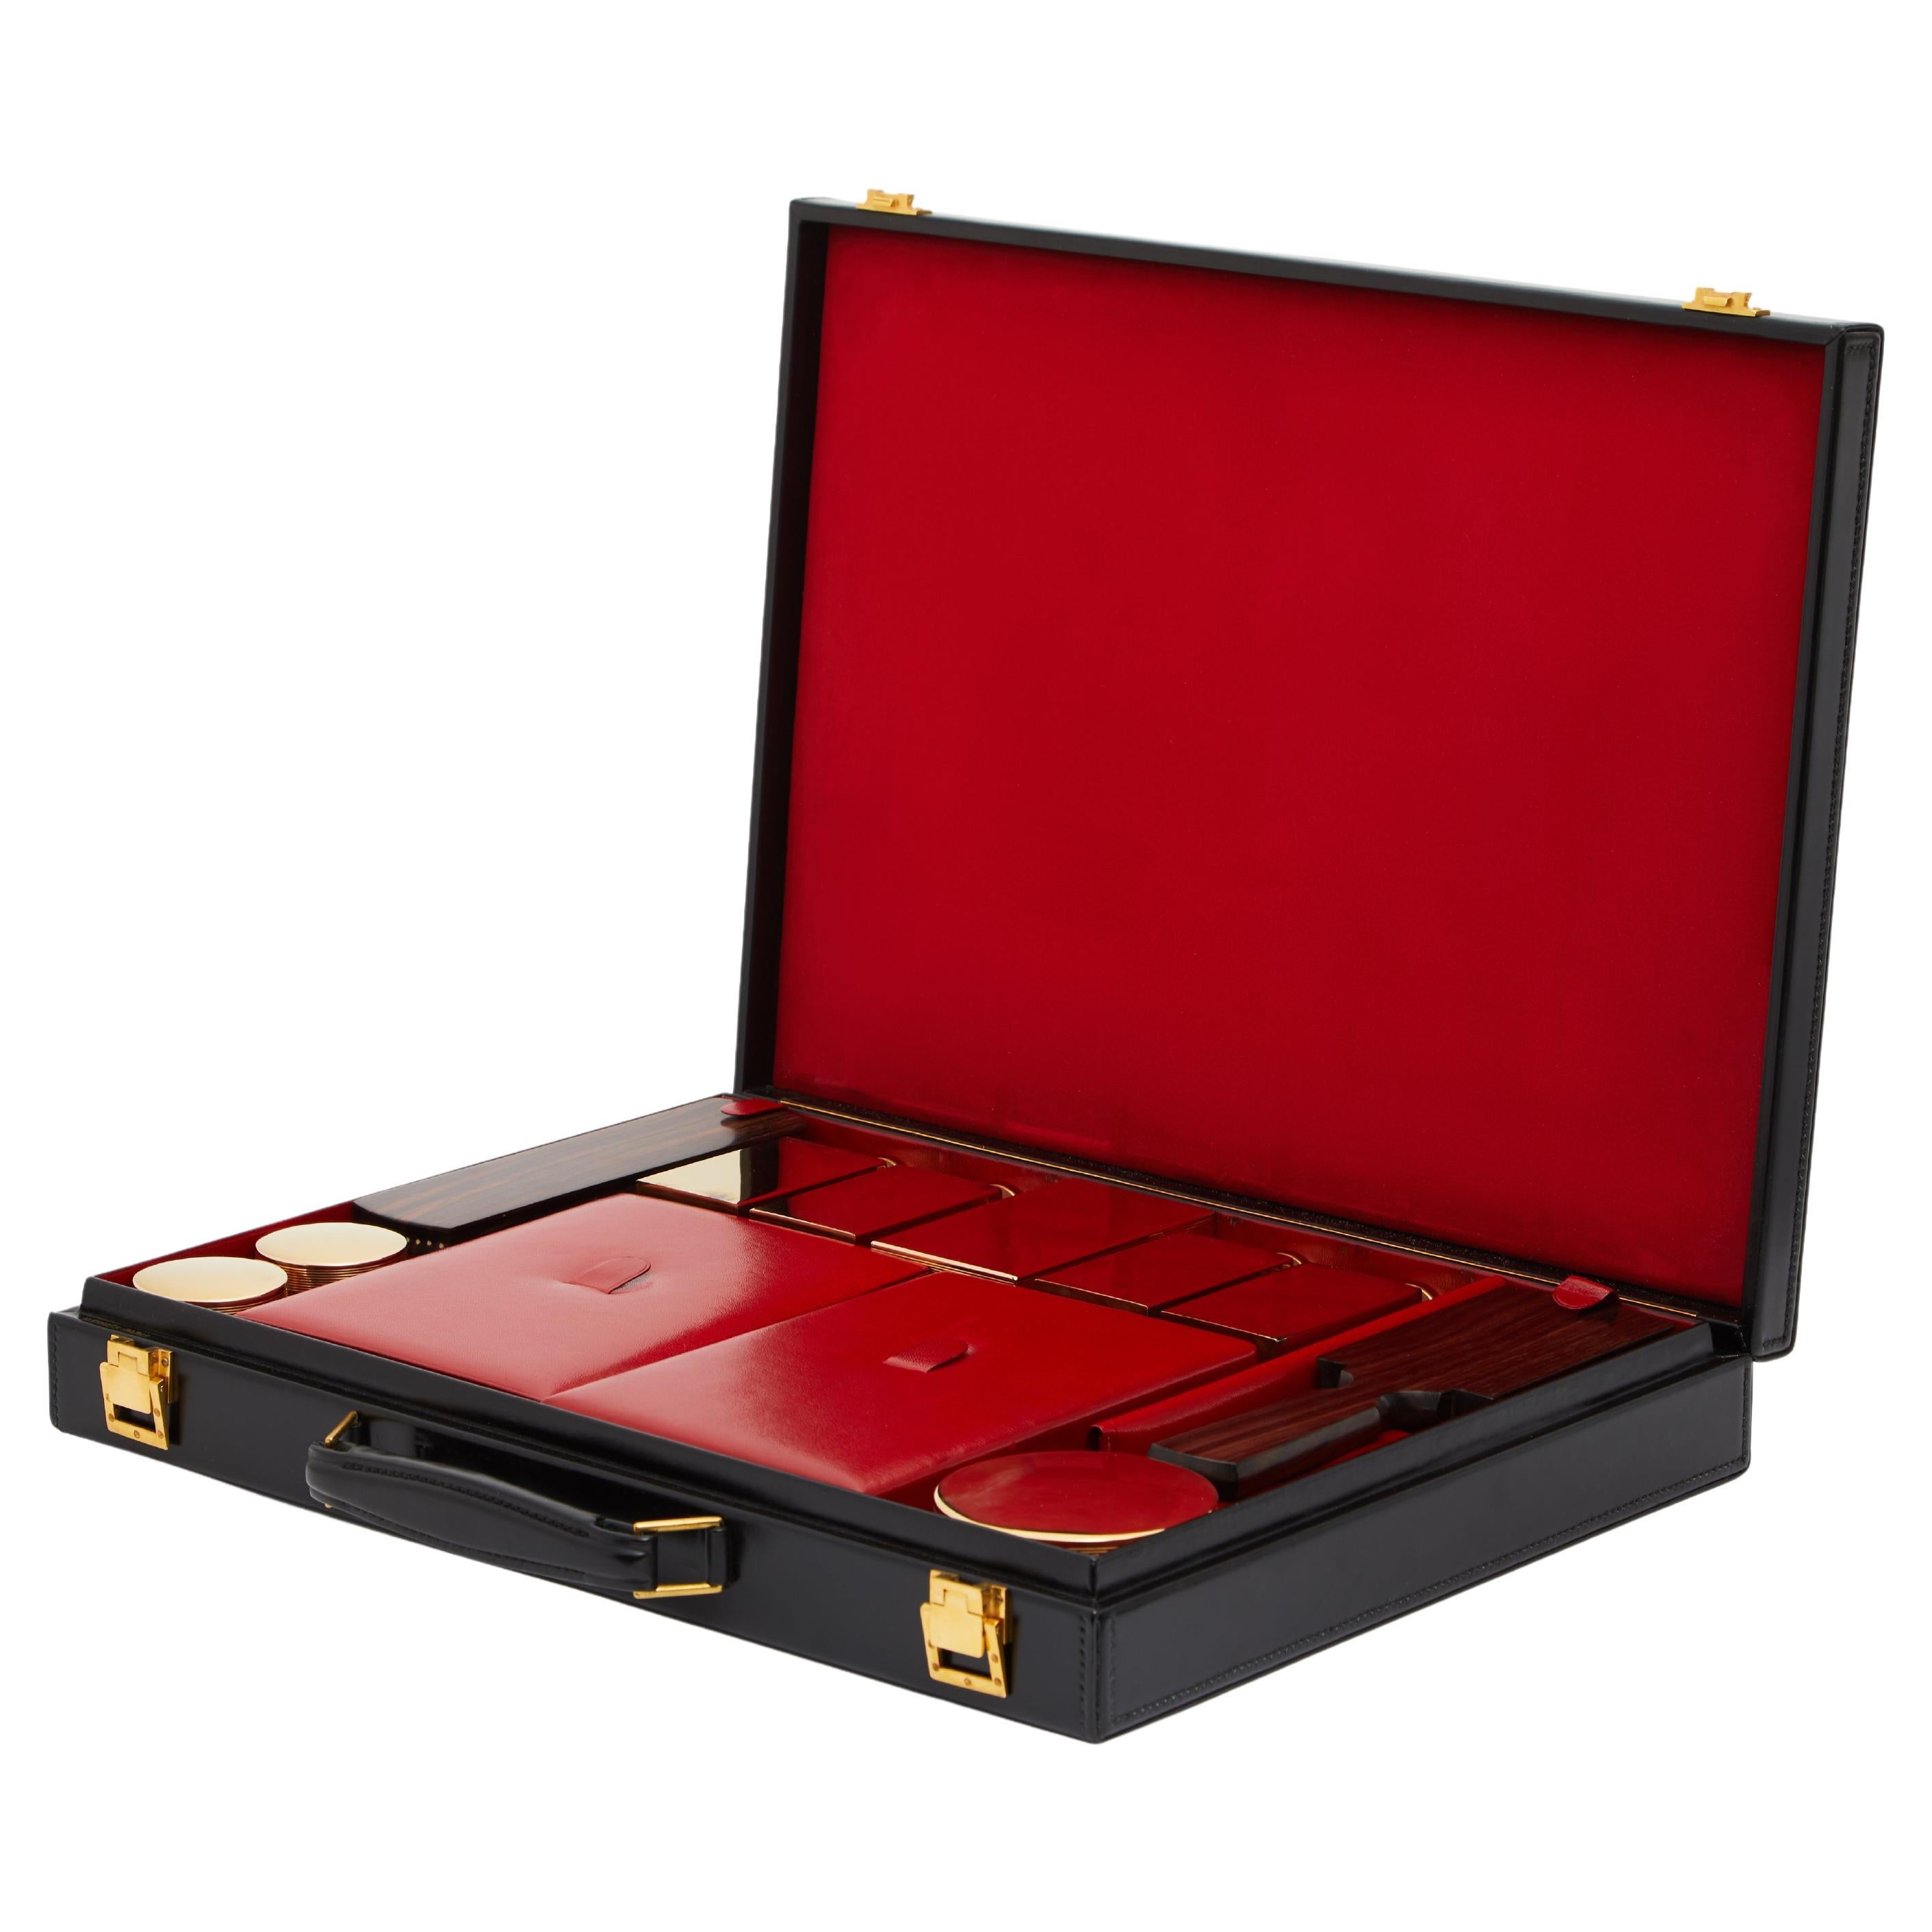 1983 Hermès malette attache case Quirius (48H) hand made, black leather “box”, completed with additional trousse de voyage set (manicure-pedicure set, brass bottles and boxes, comb, hairbrush and clothes brush). Complete with custom made external